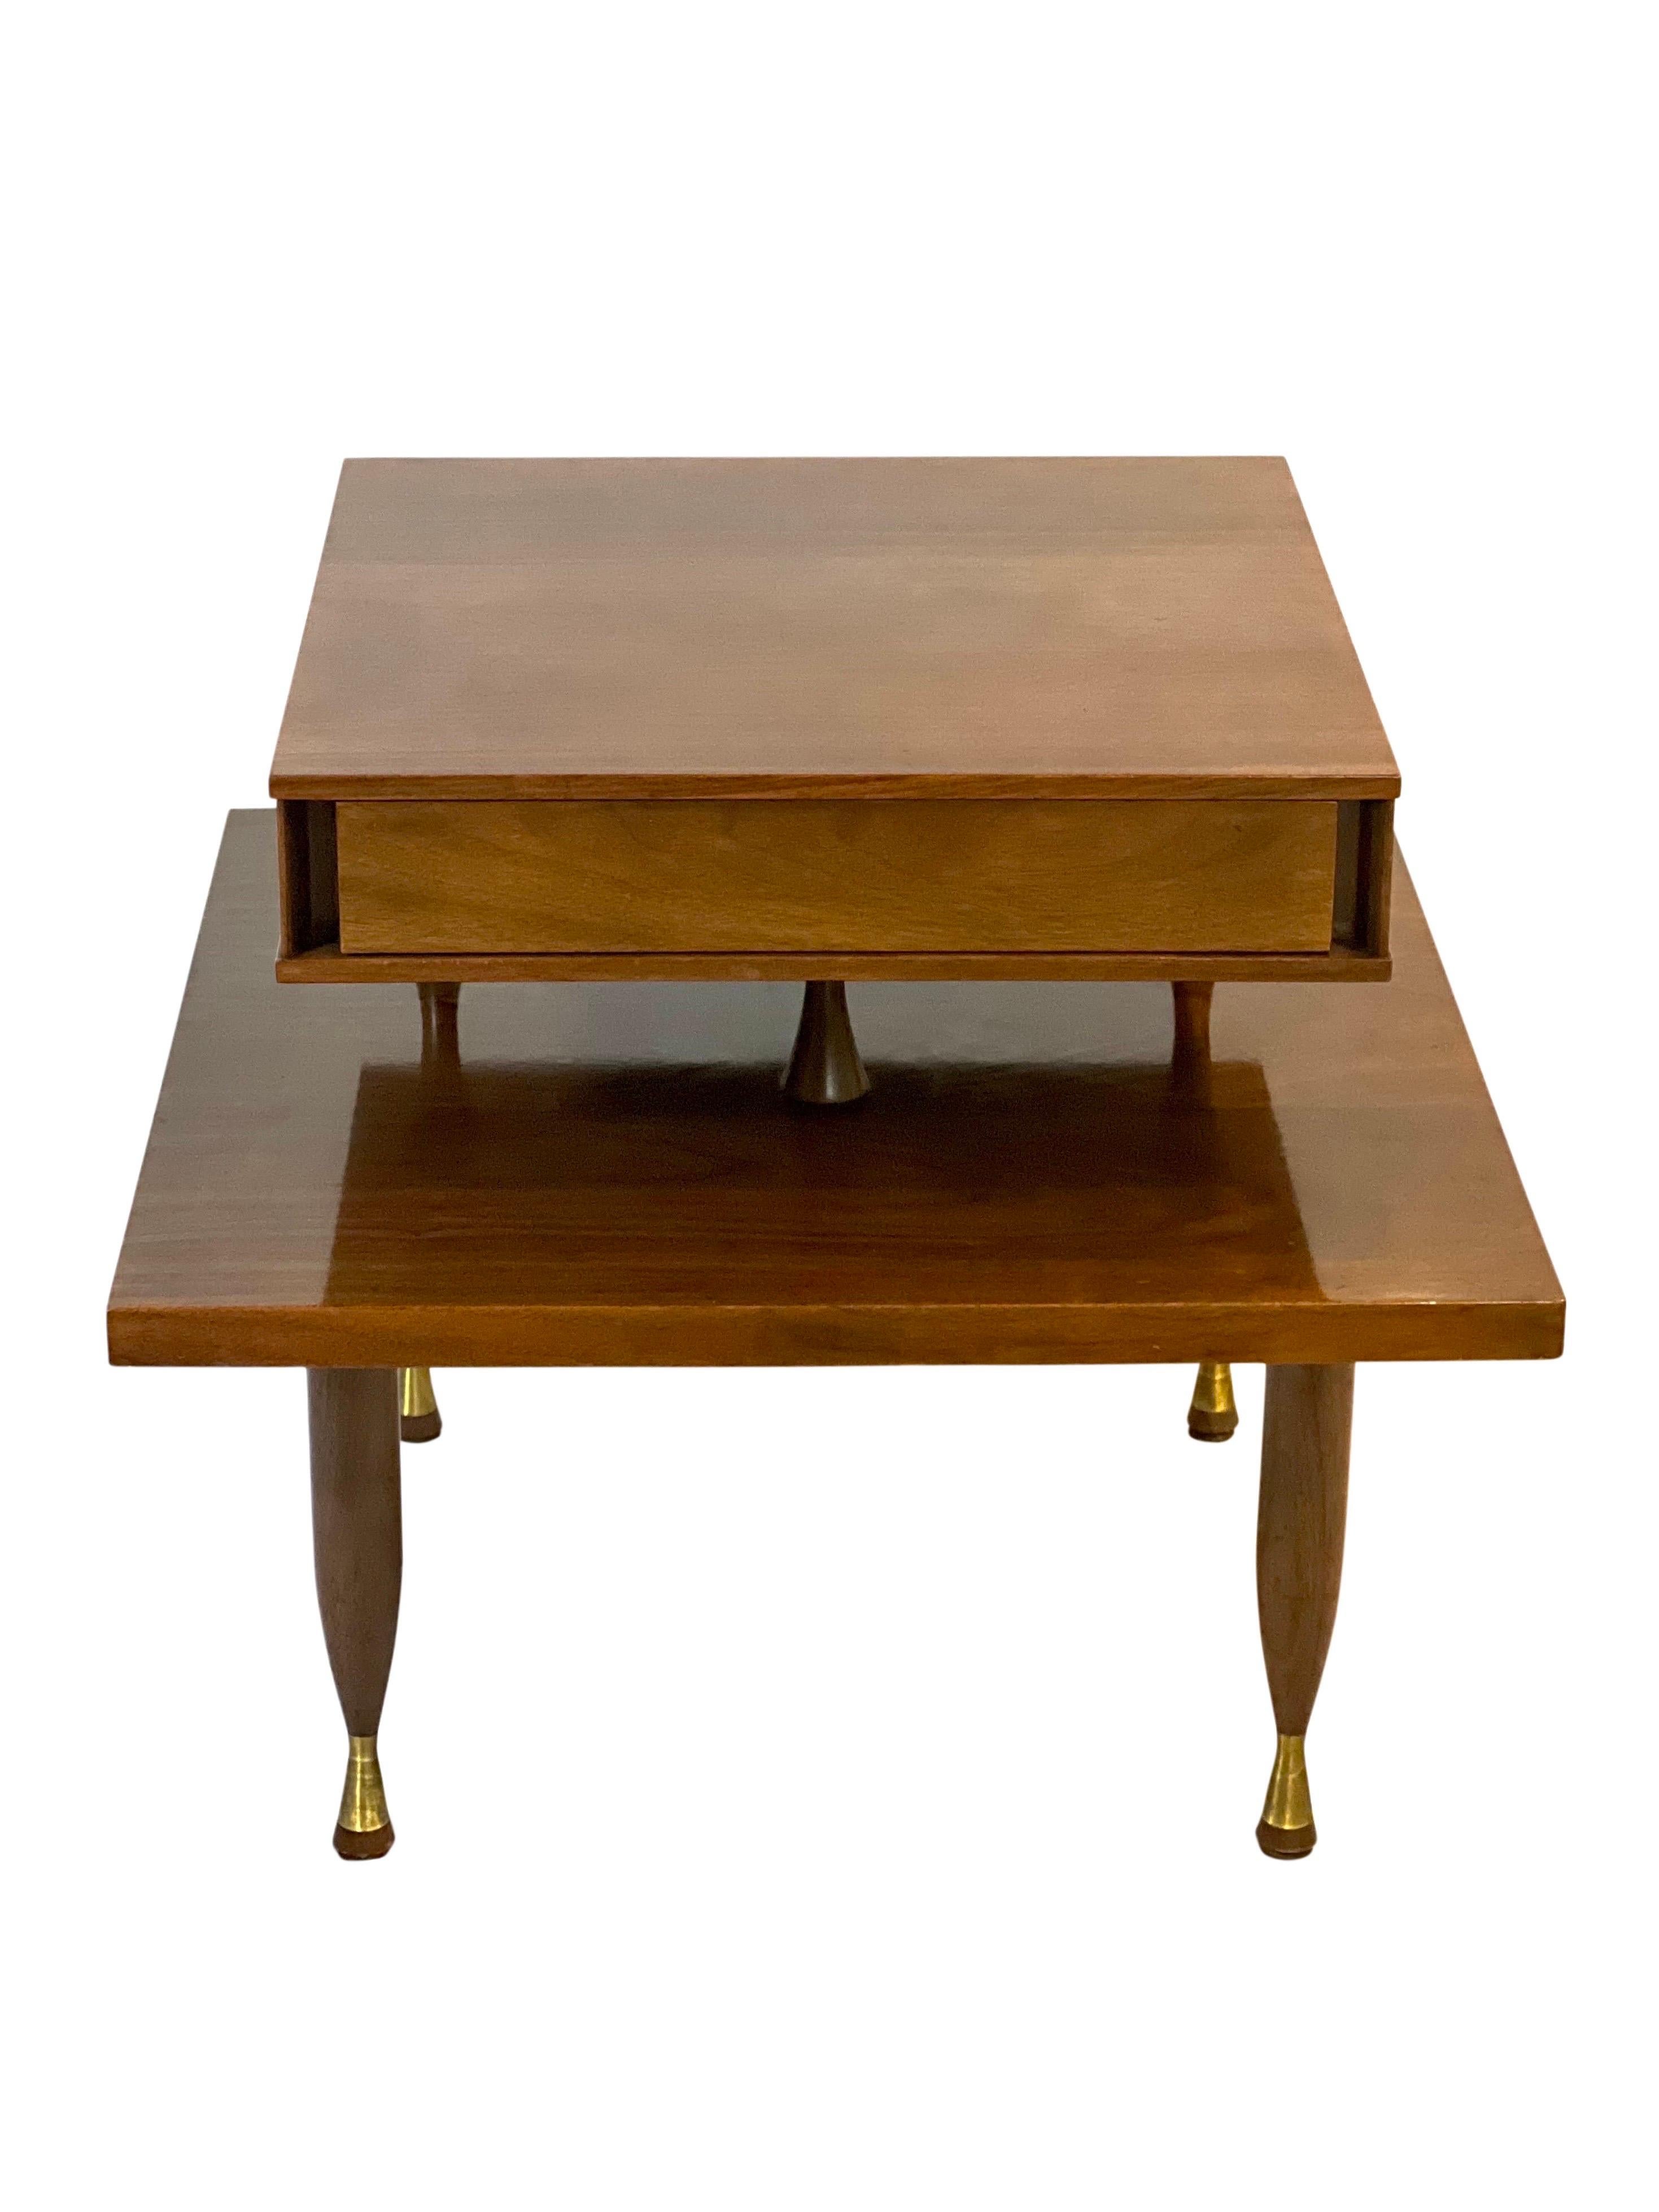 Midcentury walnut floating two tier side table in the manner of John Widdicomb. 

A refined table featuring a floating top tier with a single, minimalistic drawer. Elegant detail throughout including three hourglass shaped supports and uniquely